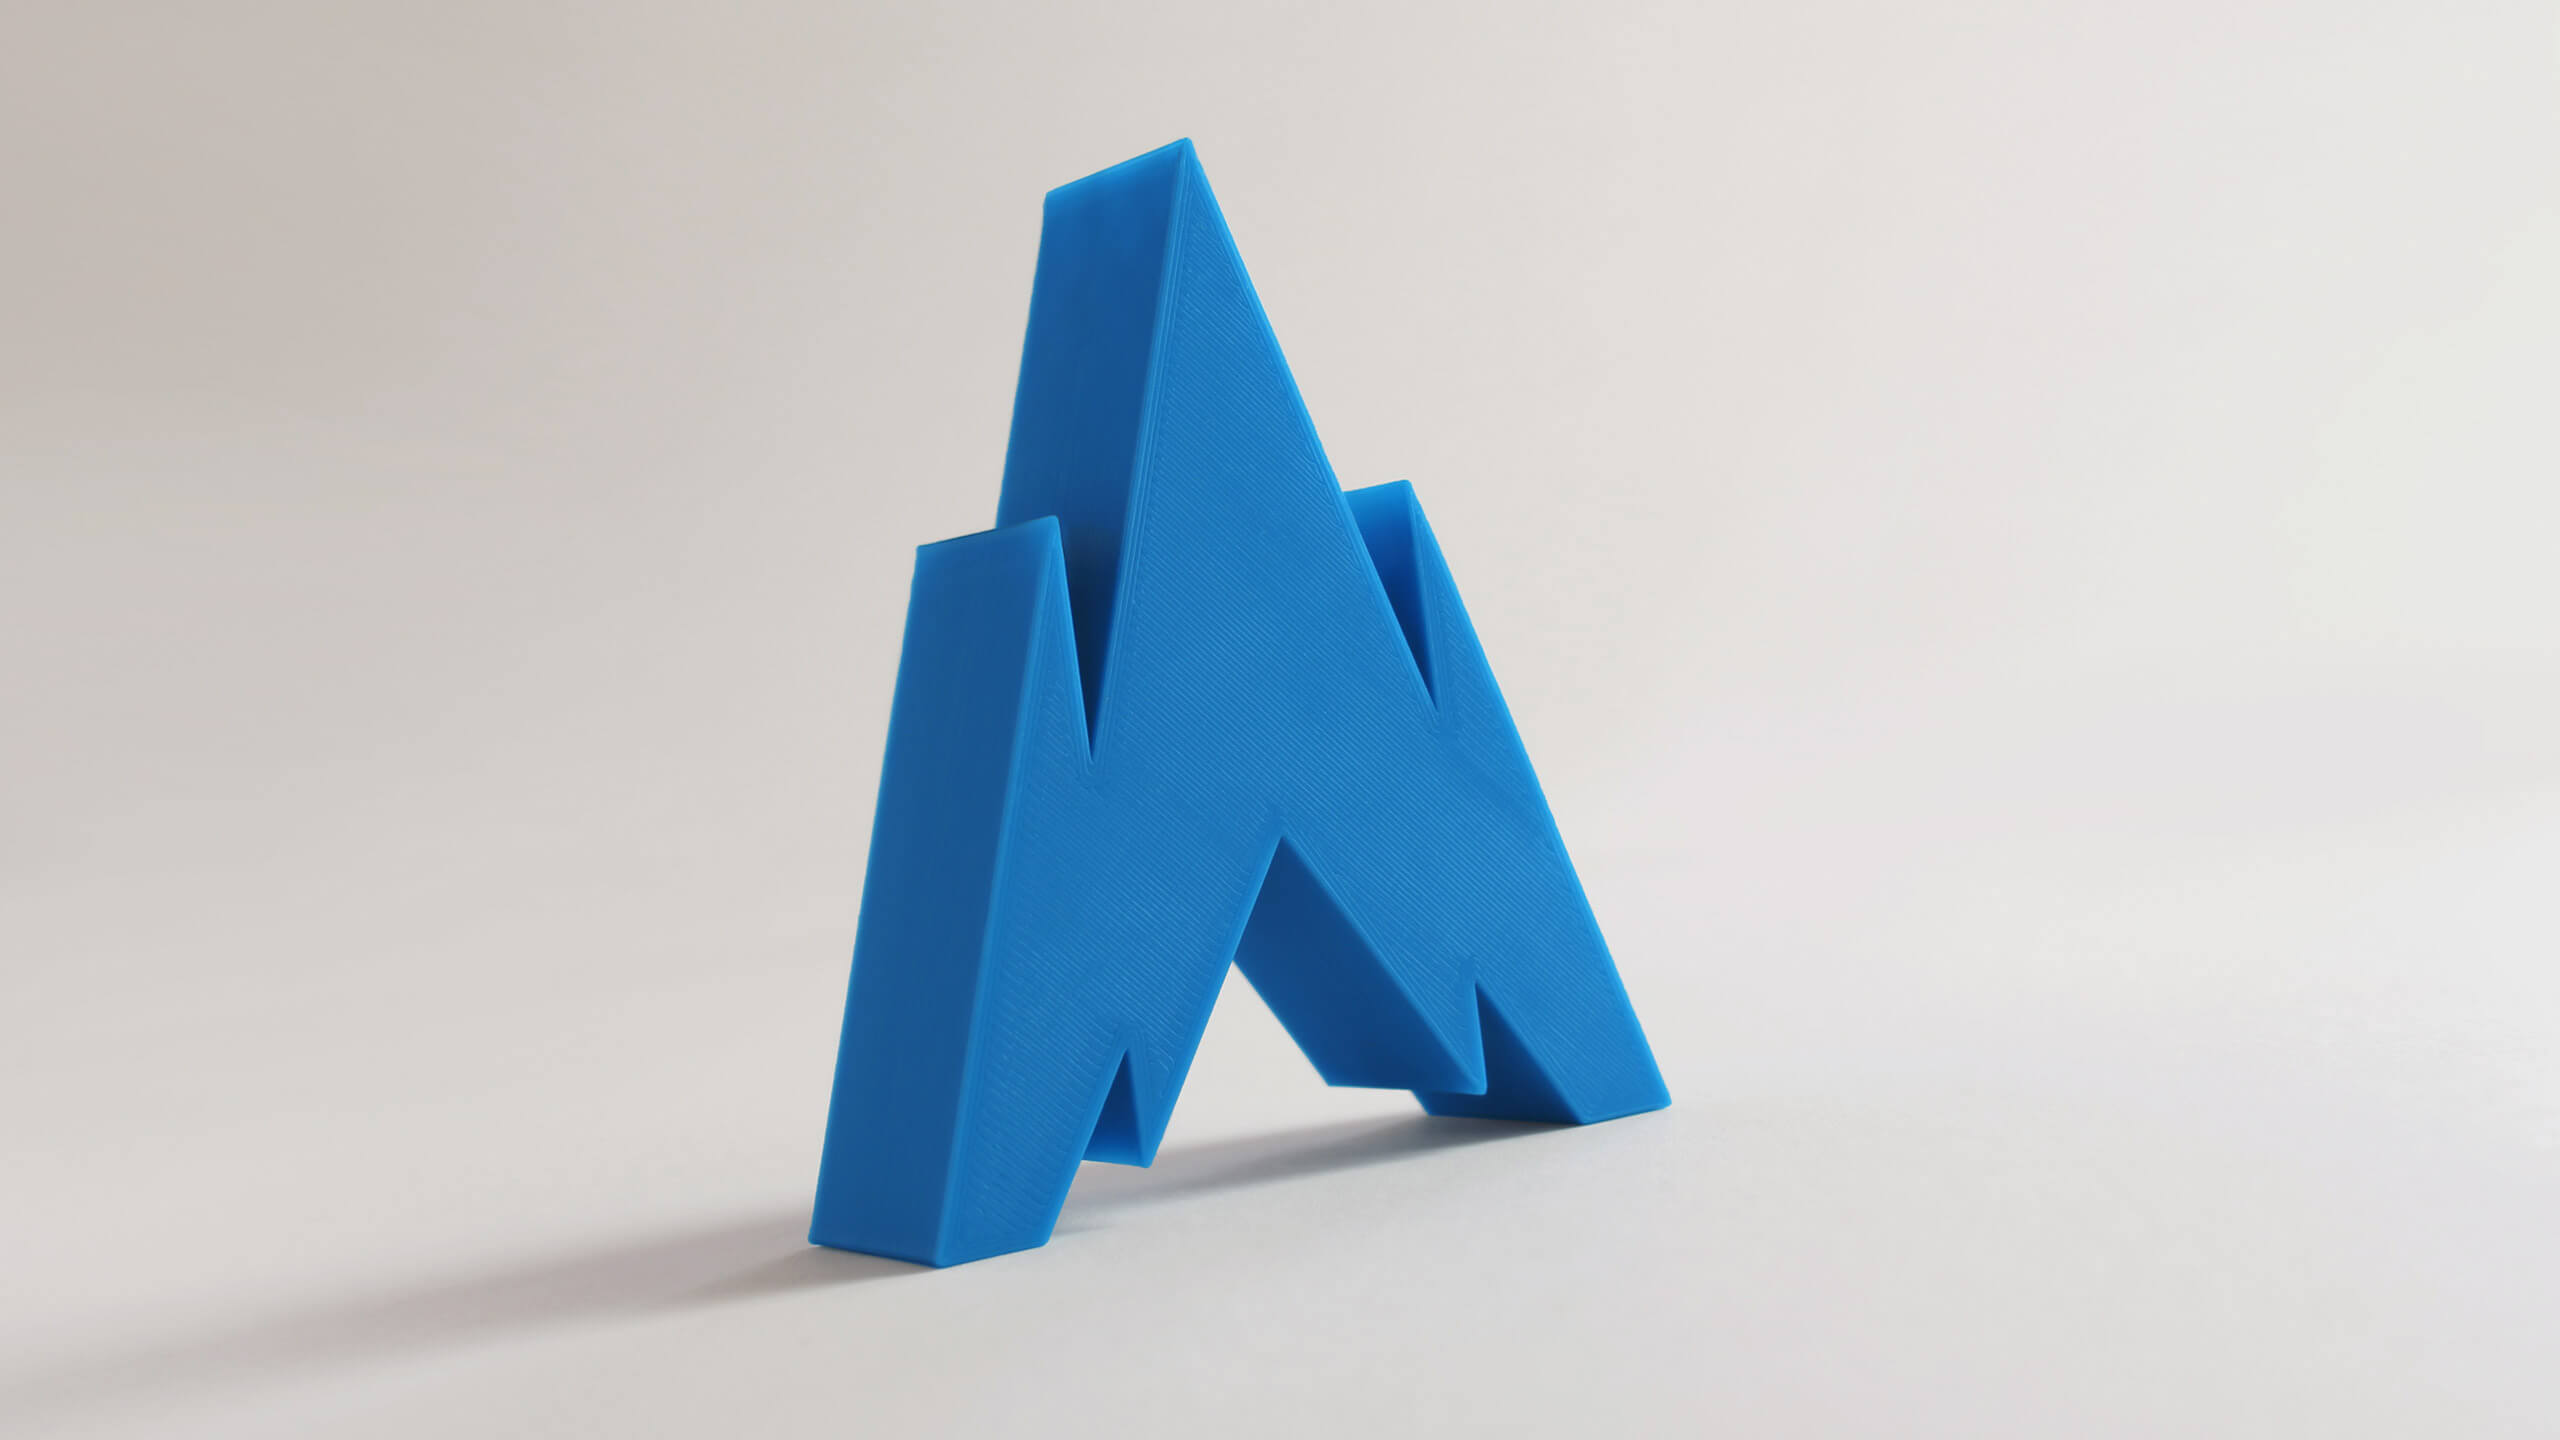 A Rise Media news thumbnail featuring a 3D print of our new logo, for the January 2021 Brand Update article